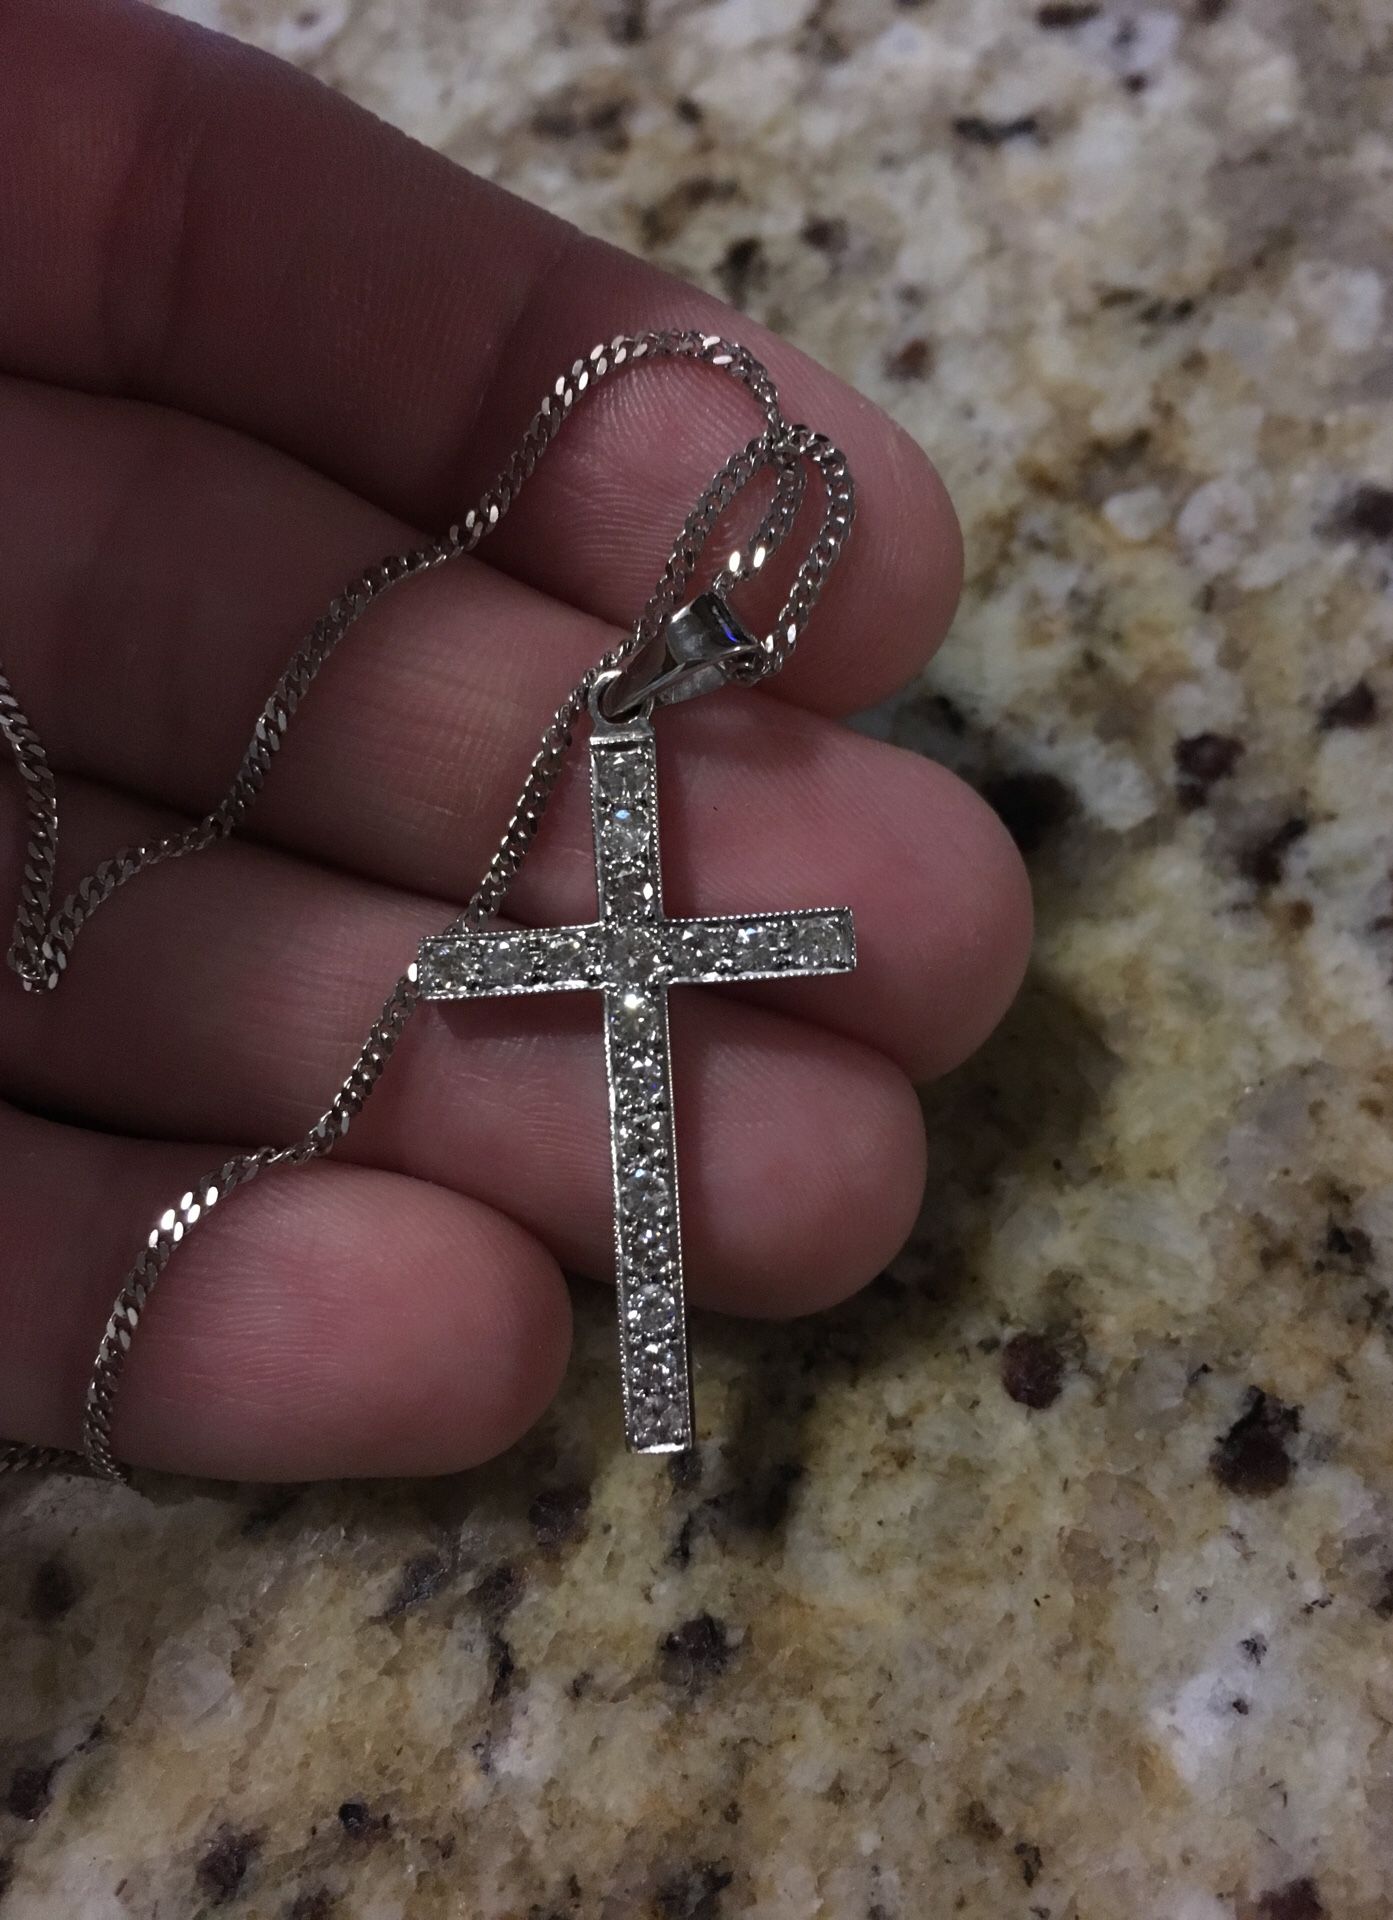 Silver cross with tiny diamond like stones and chain